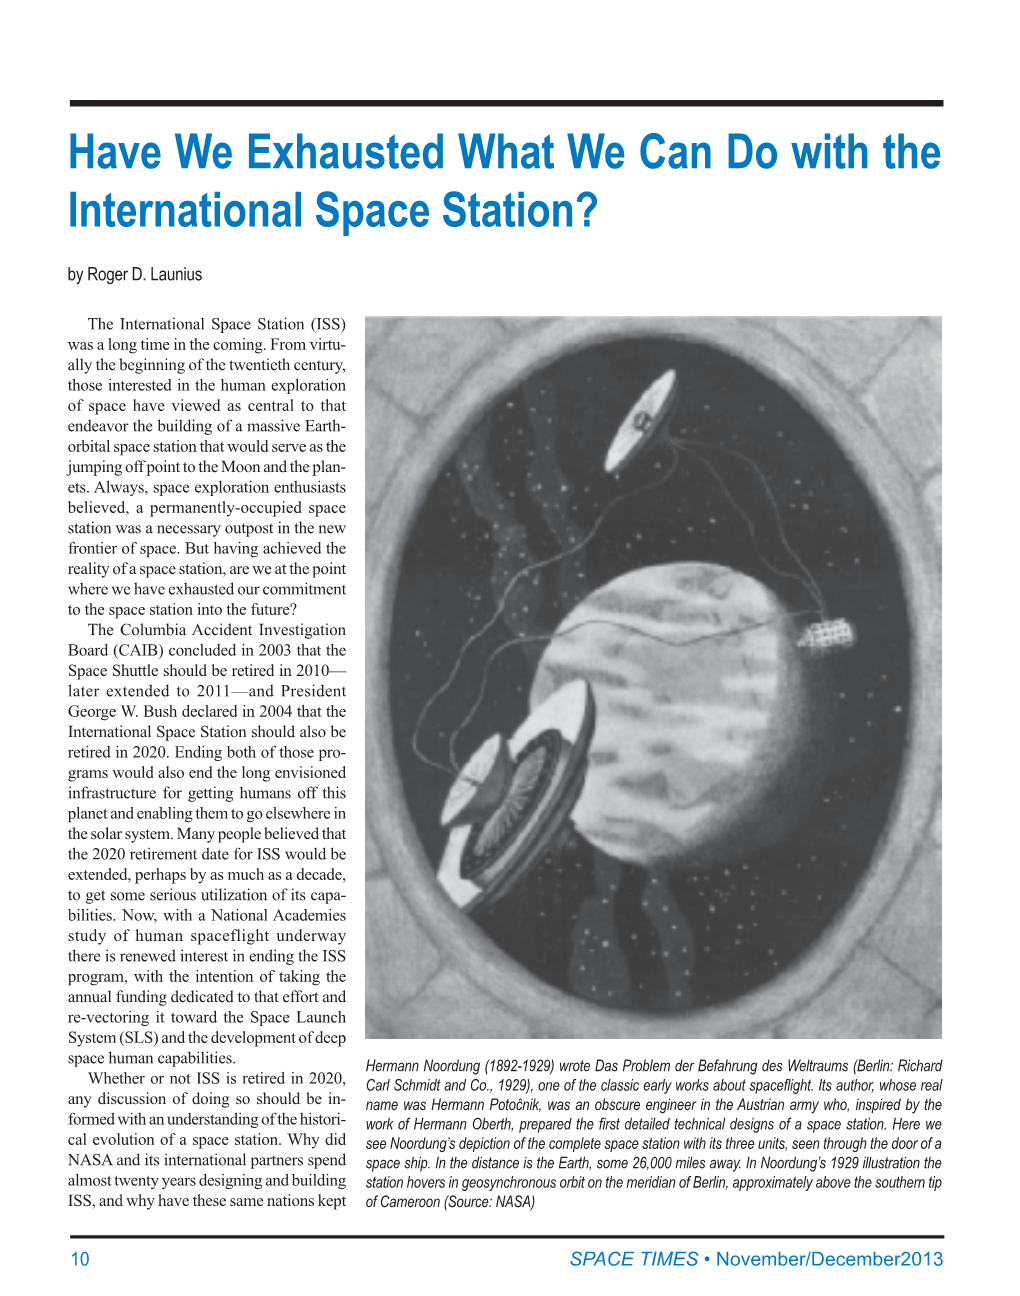 Have We Exhausted What We Can Do with the International Space Station? by Roger D